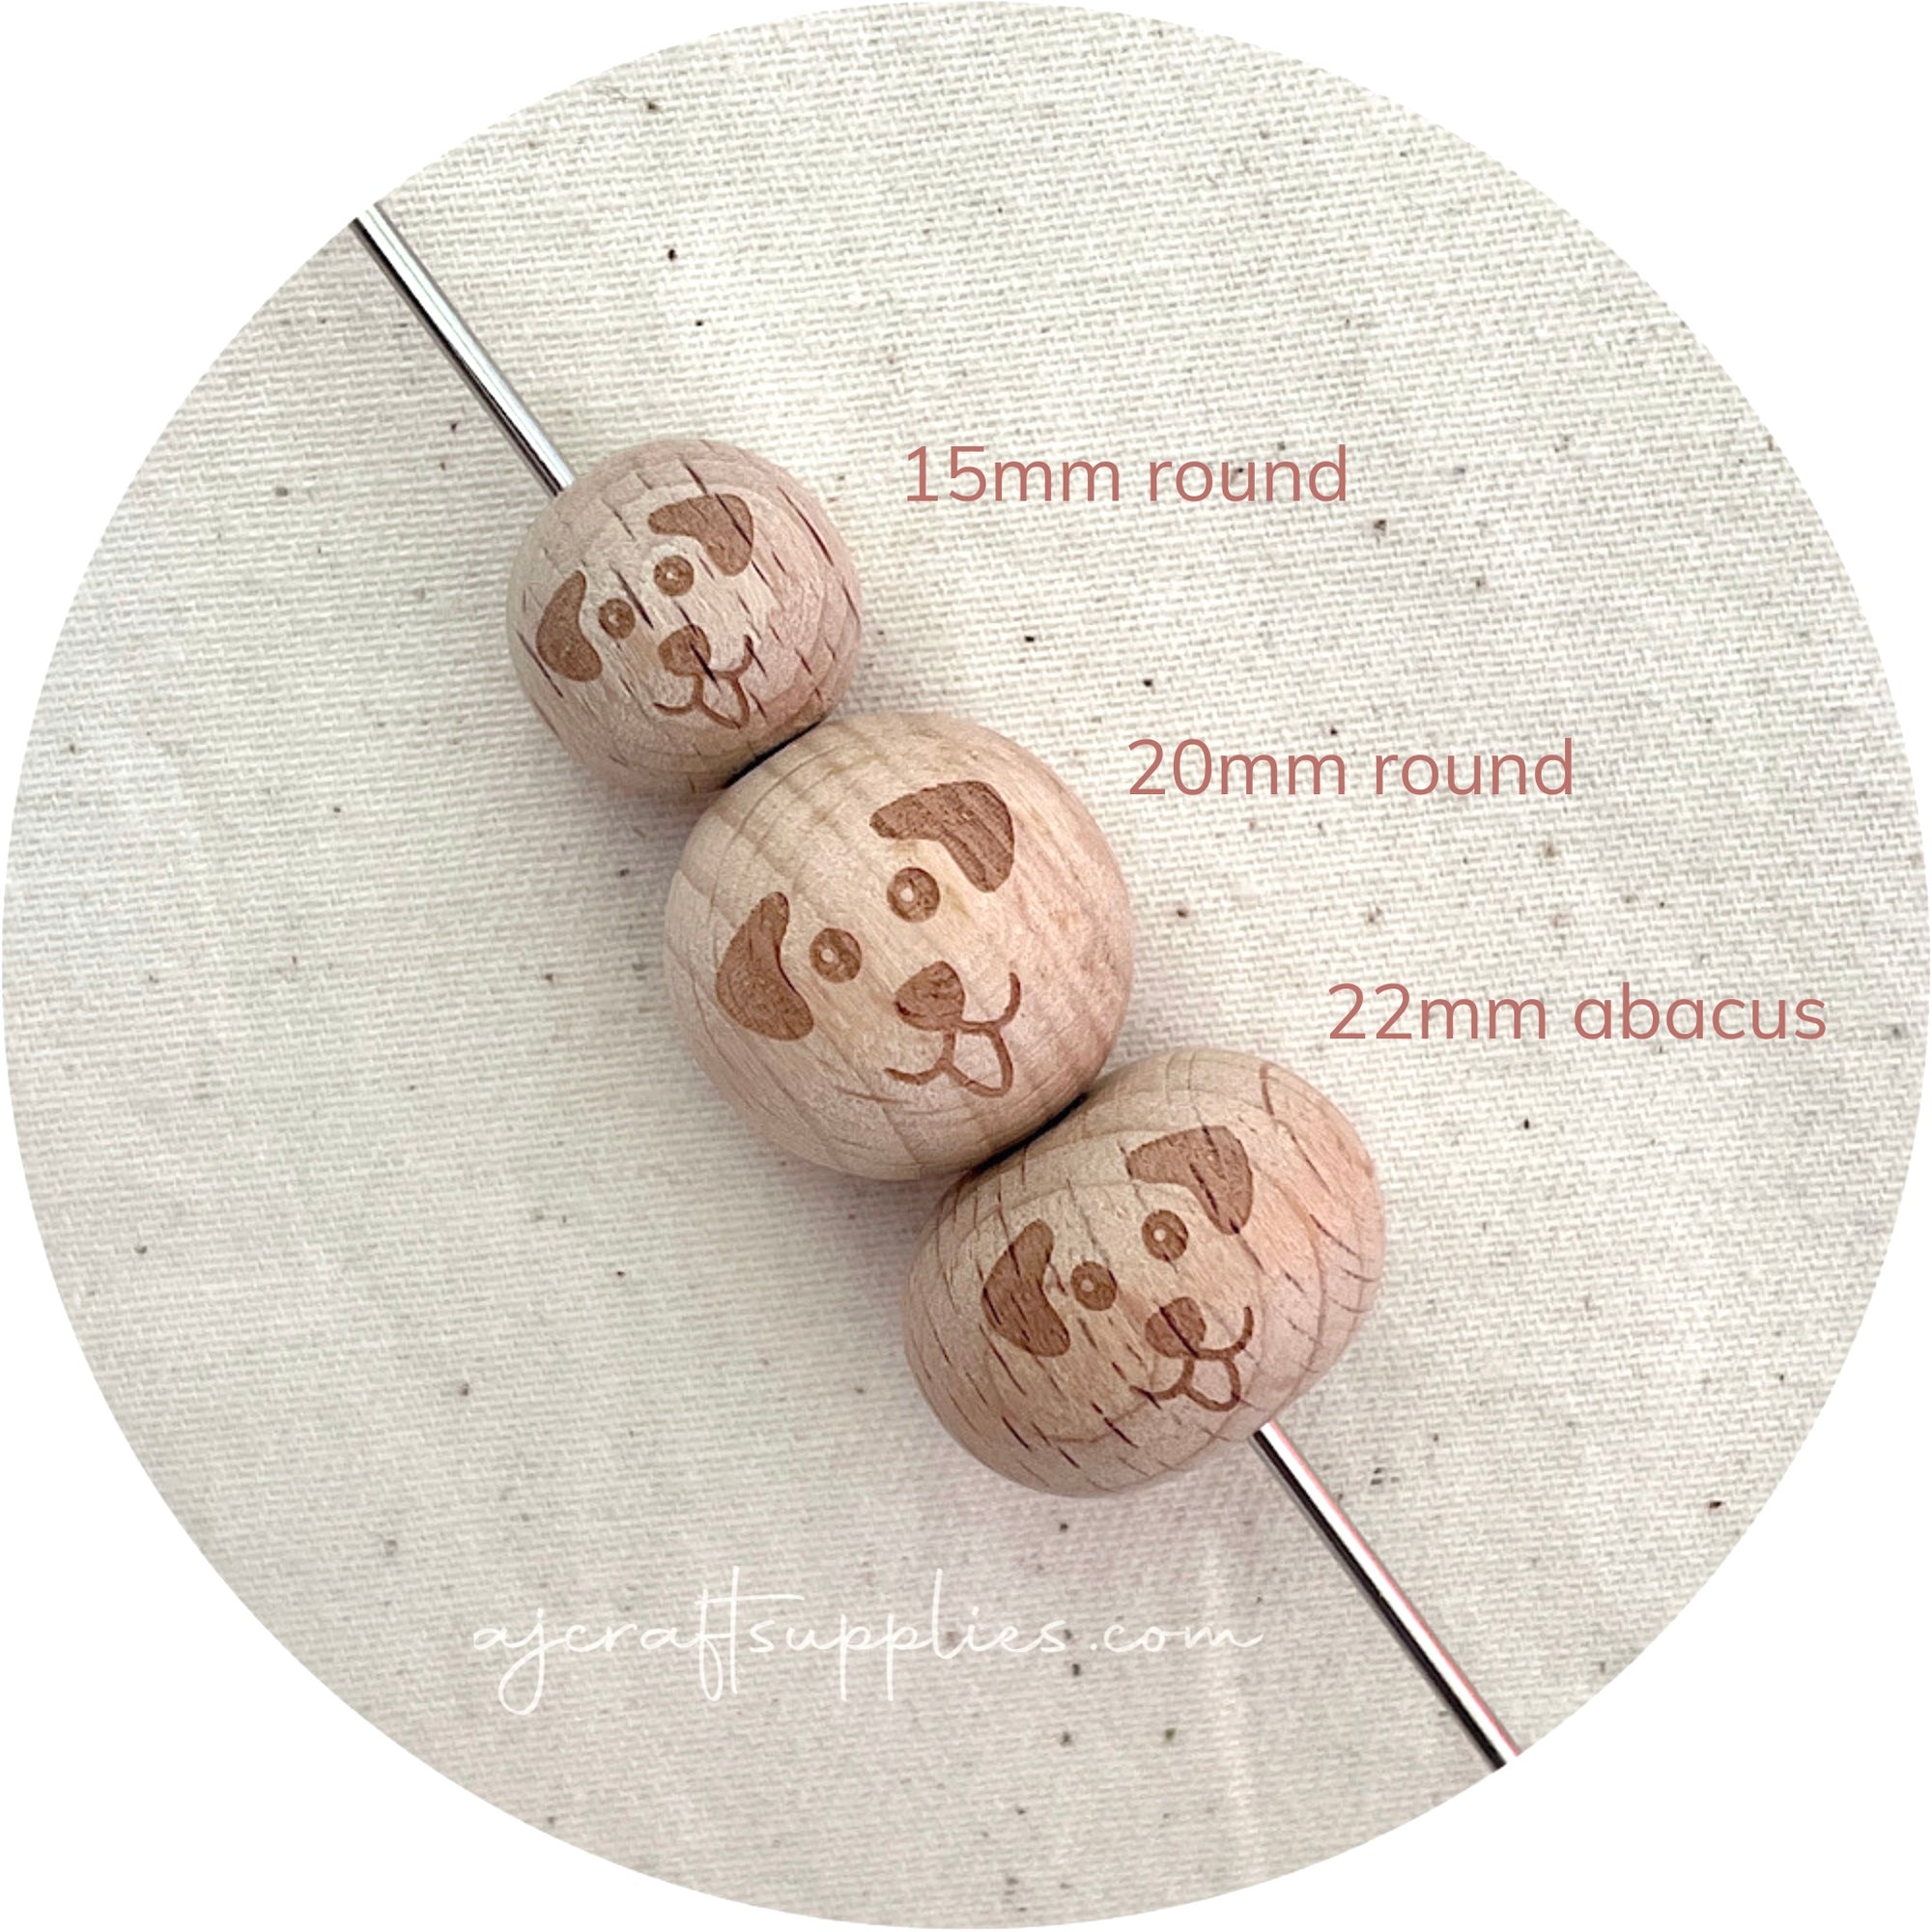 Beech Wood Engraved Beads (DOG) - CHOOSE A SIZE - 5 beads